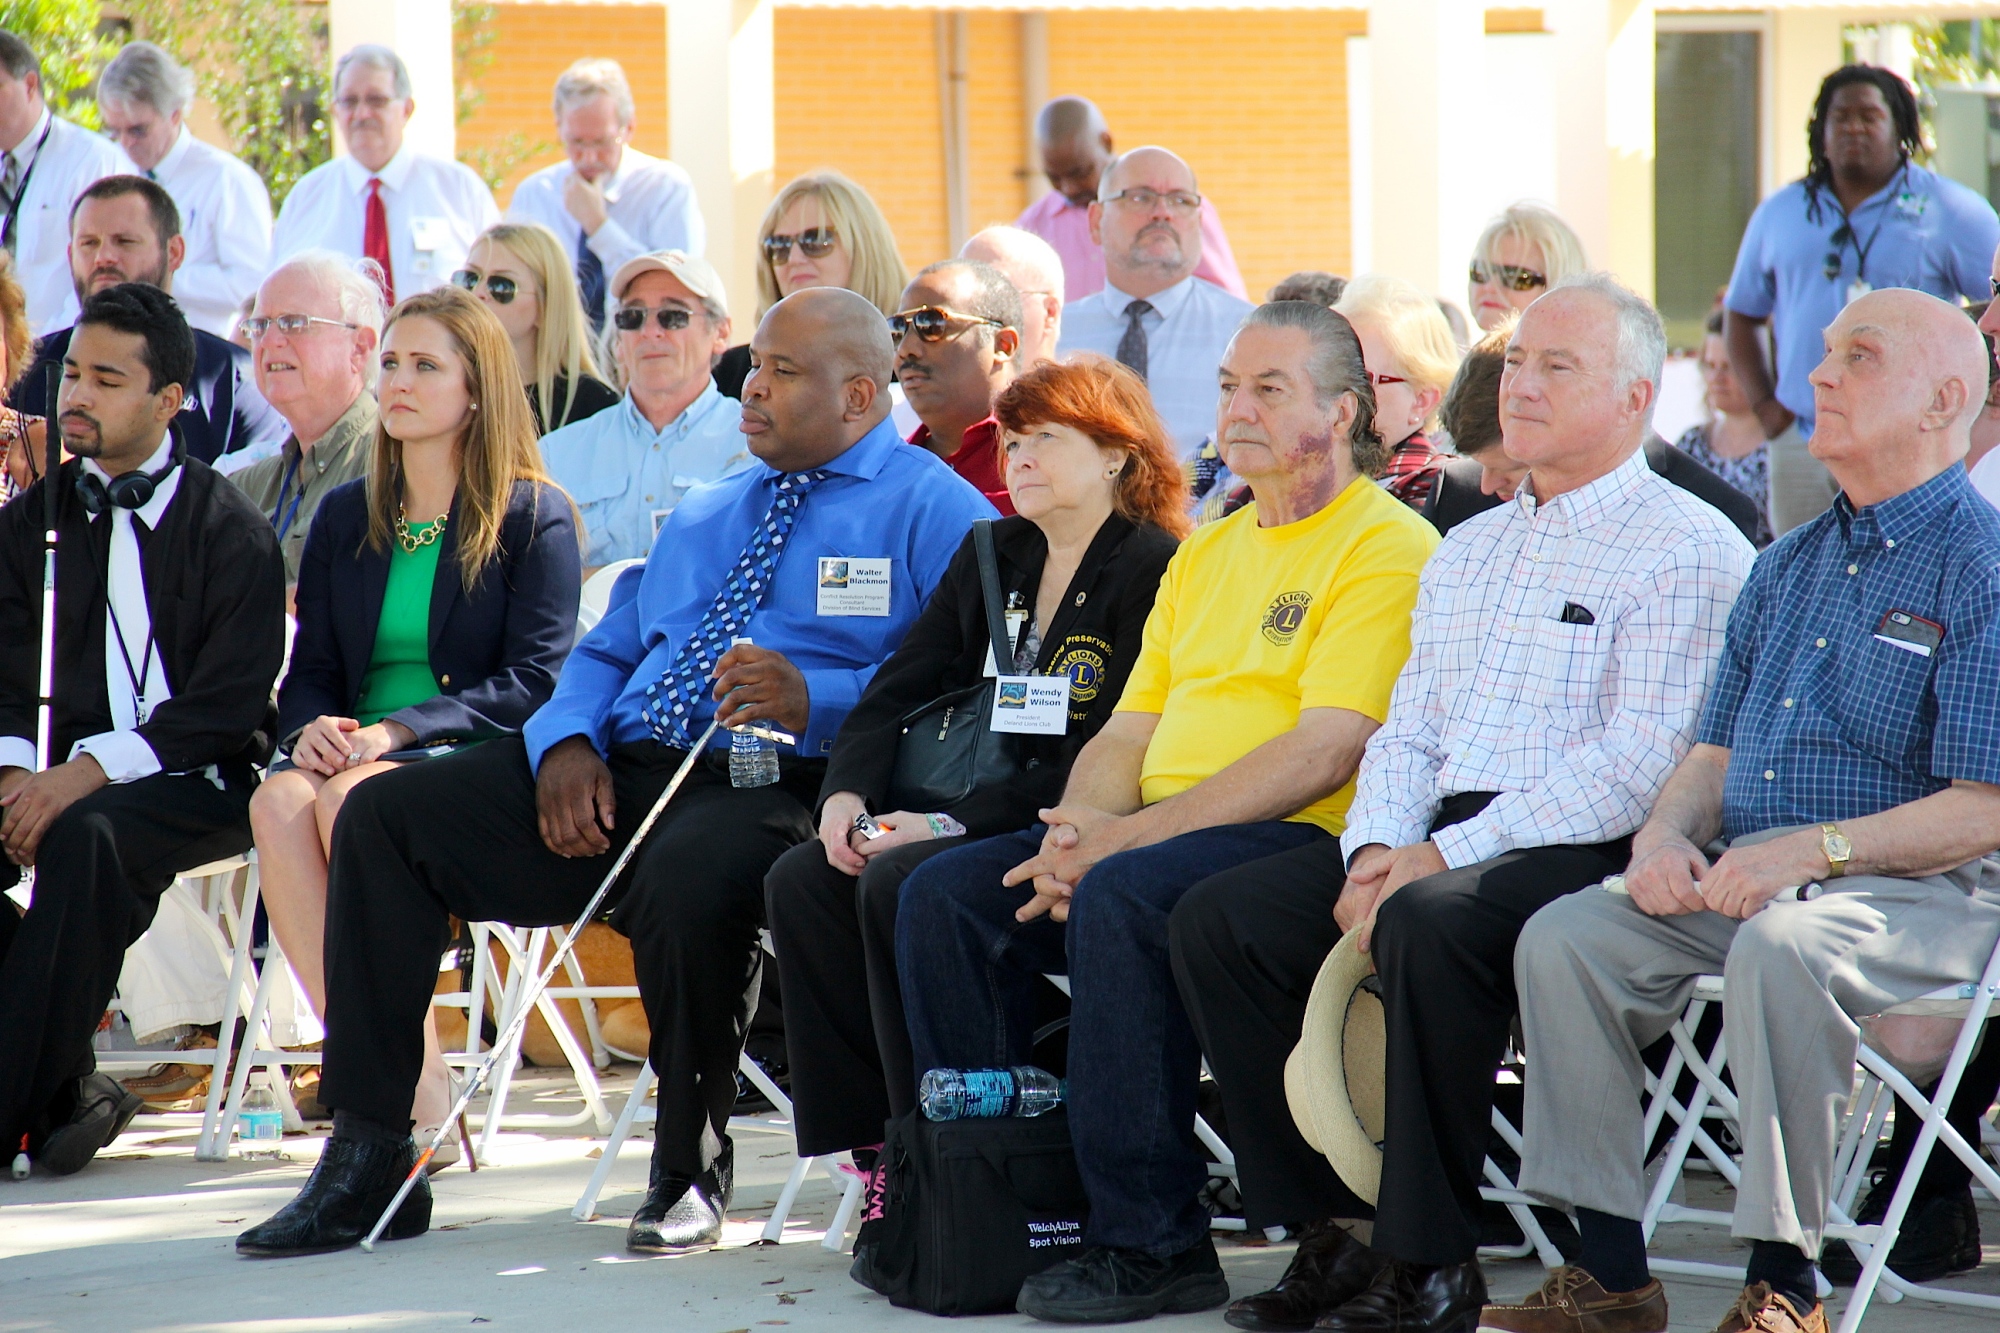 Guests listen intently to the speaker during the 75th anniversary program